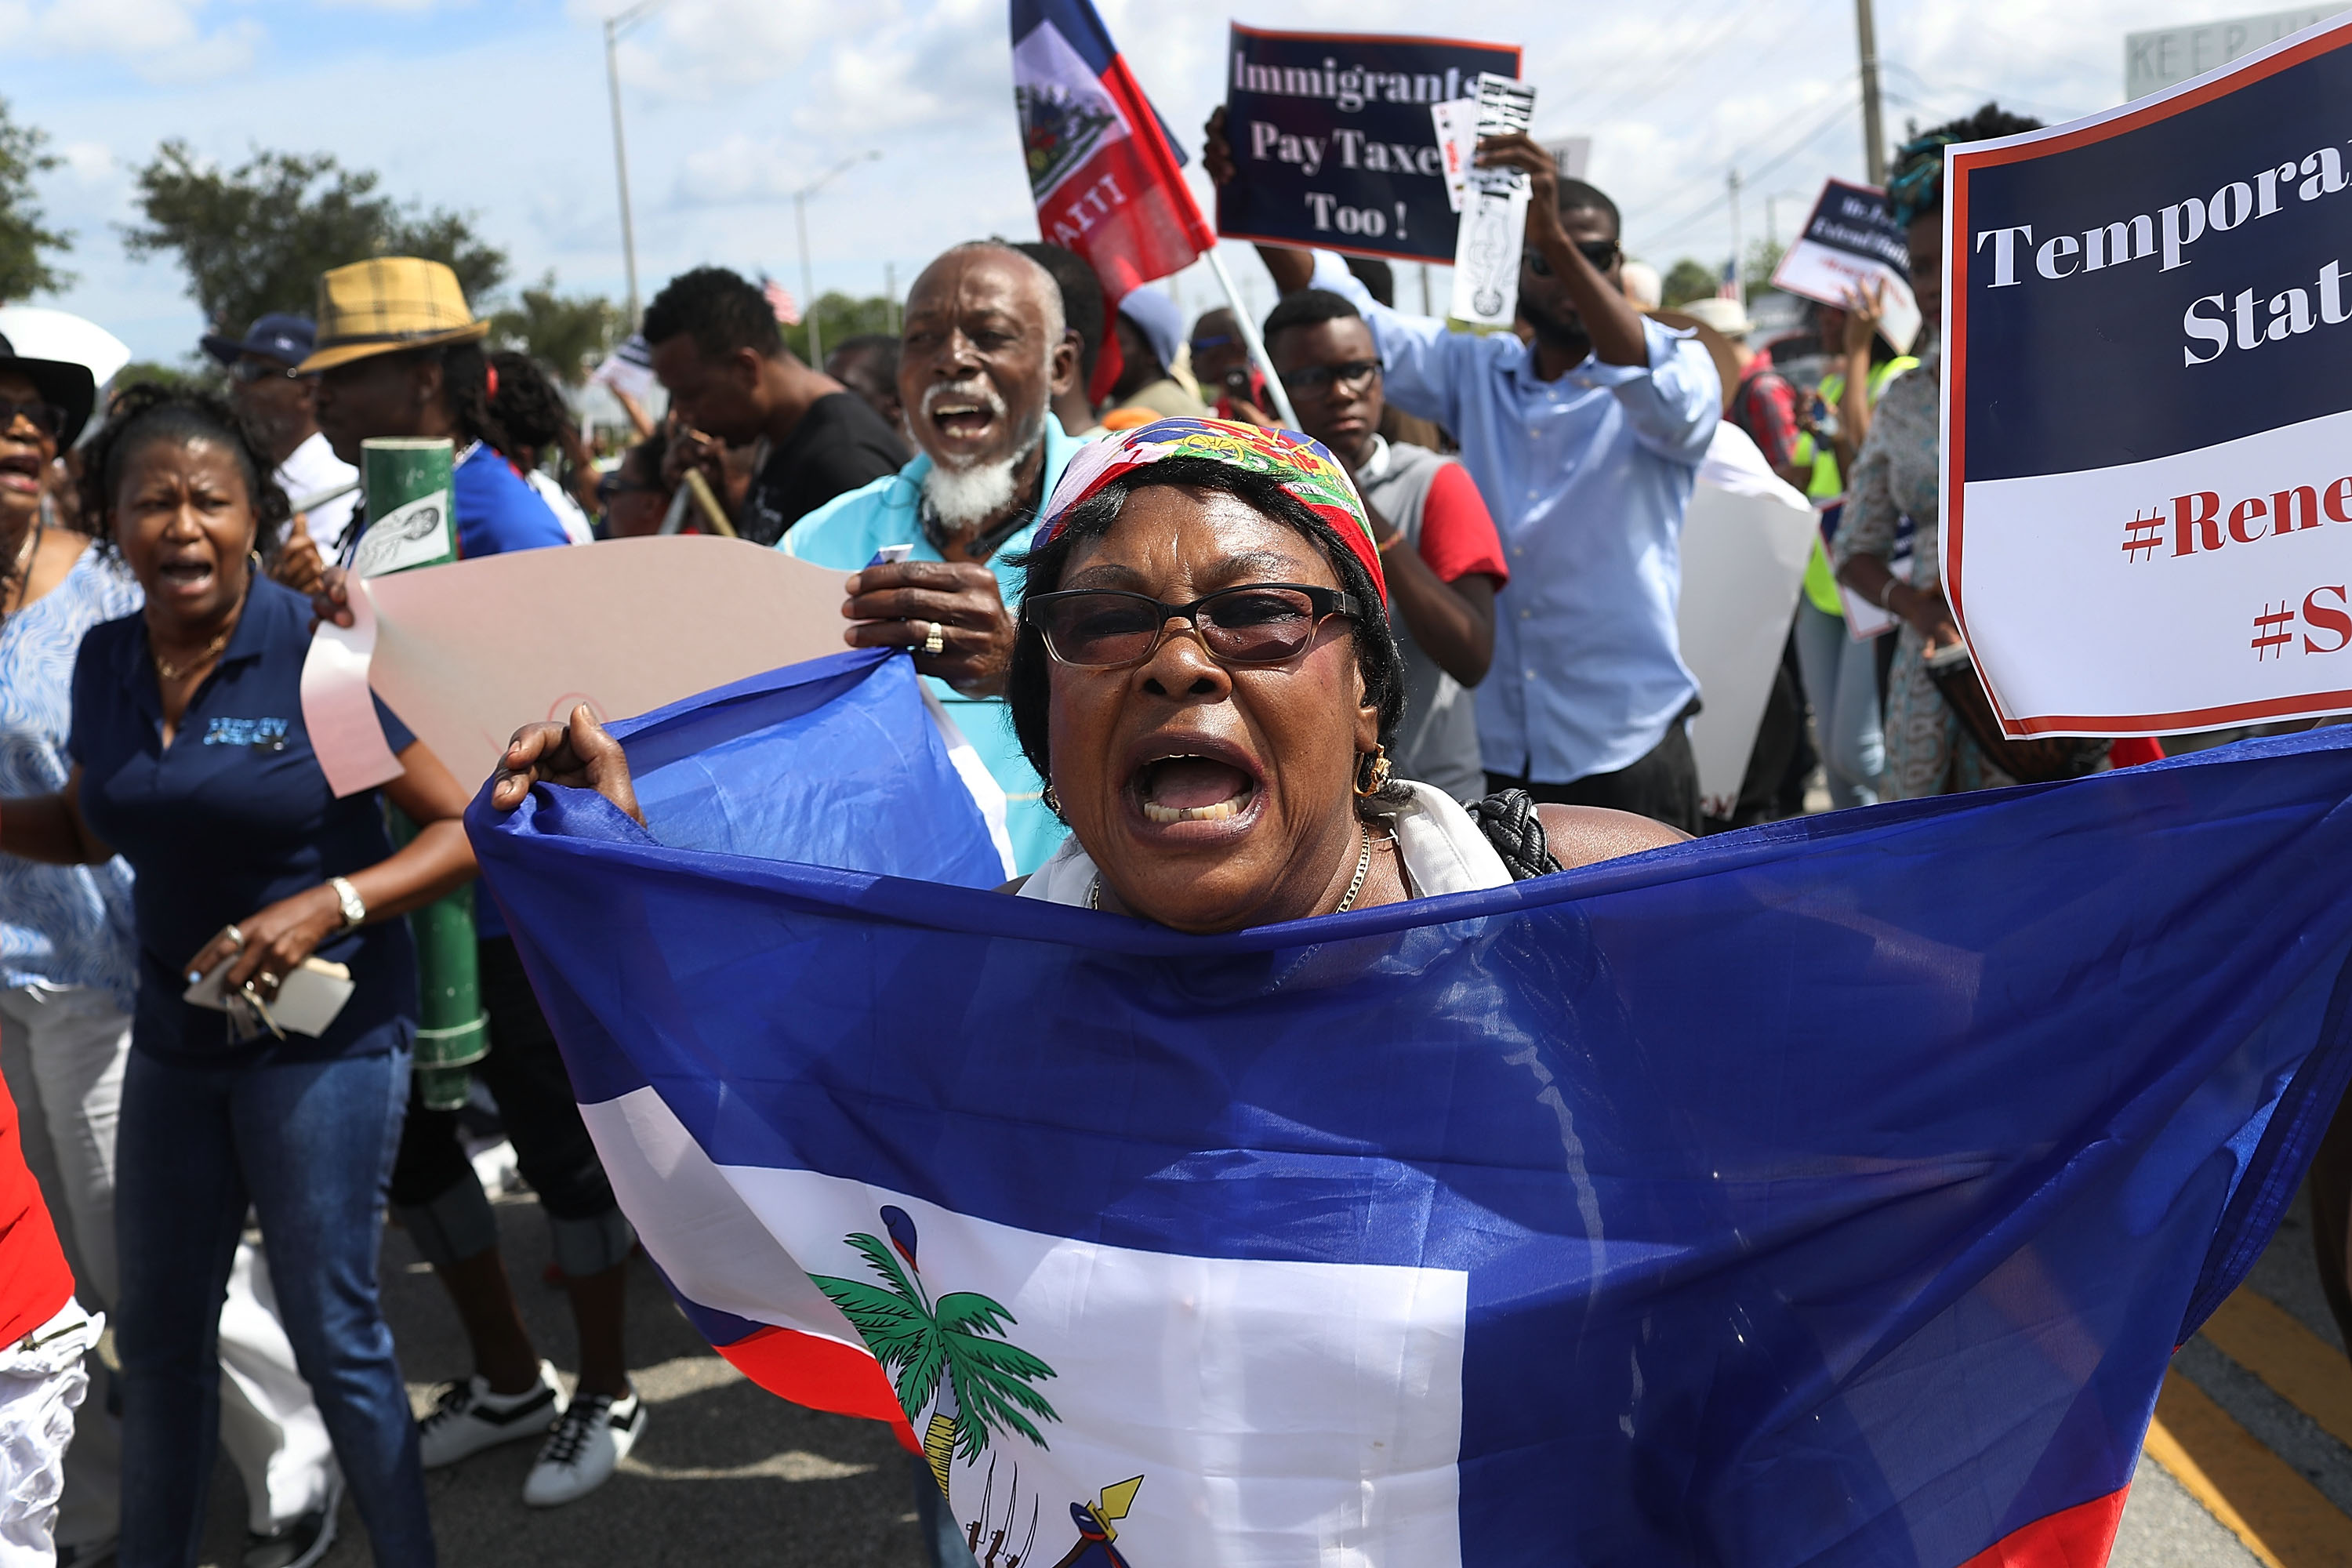 UPDATE: U.S. Government Extends Temporary Protected Status for Haitian Nationals For 6 More Months